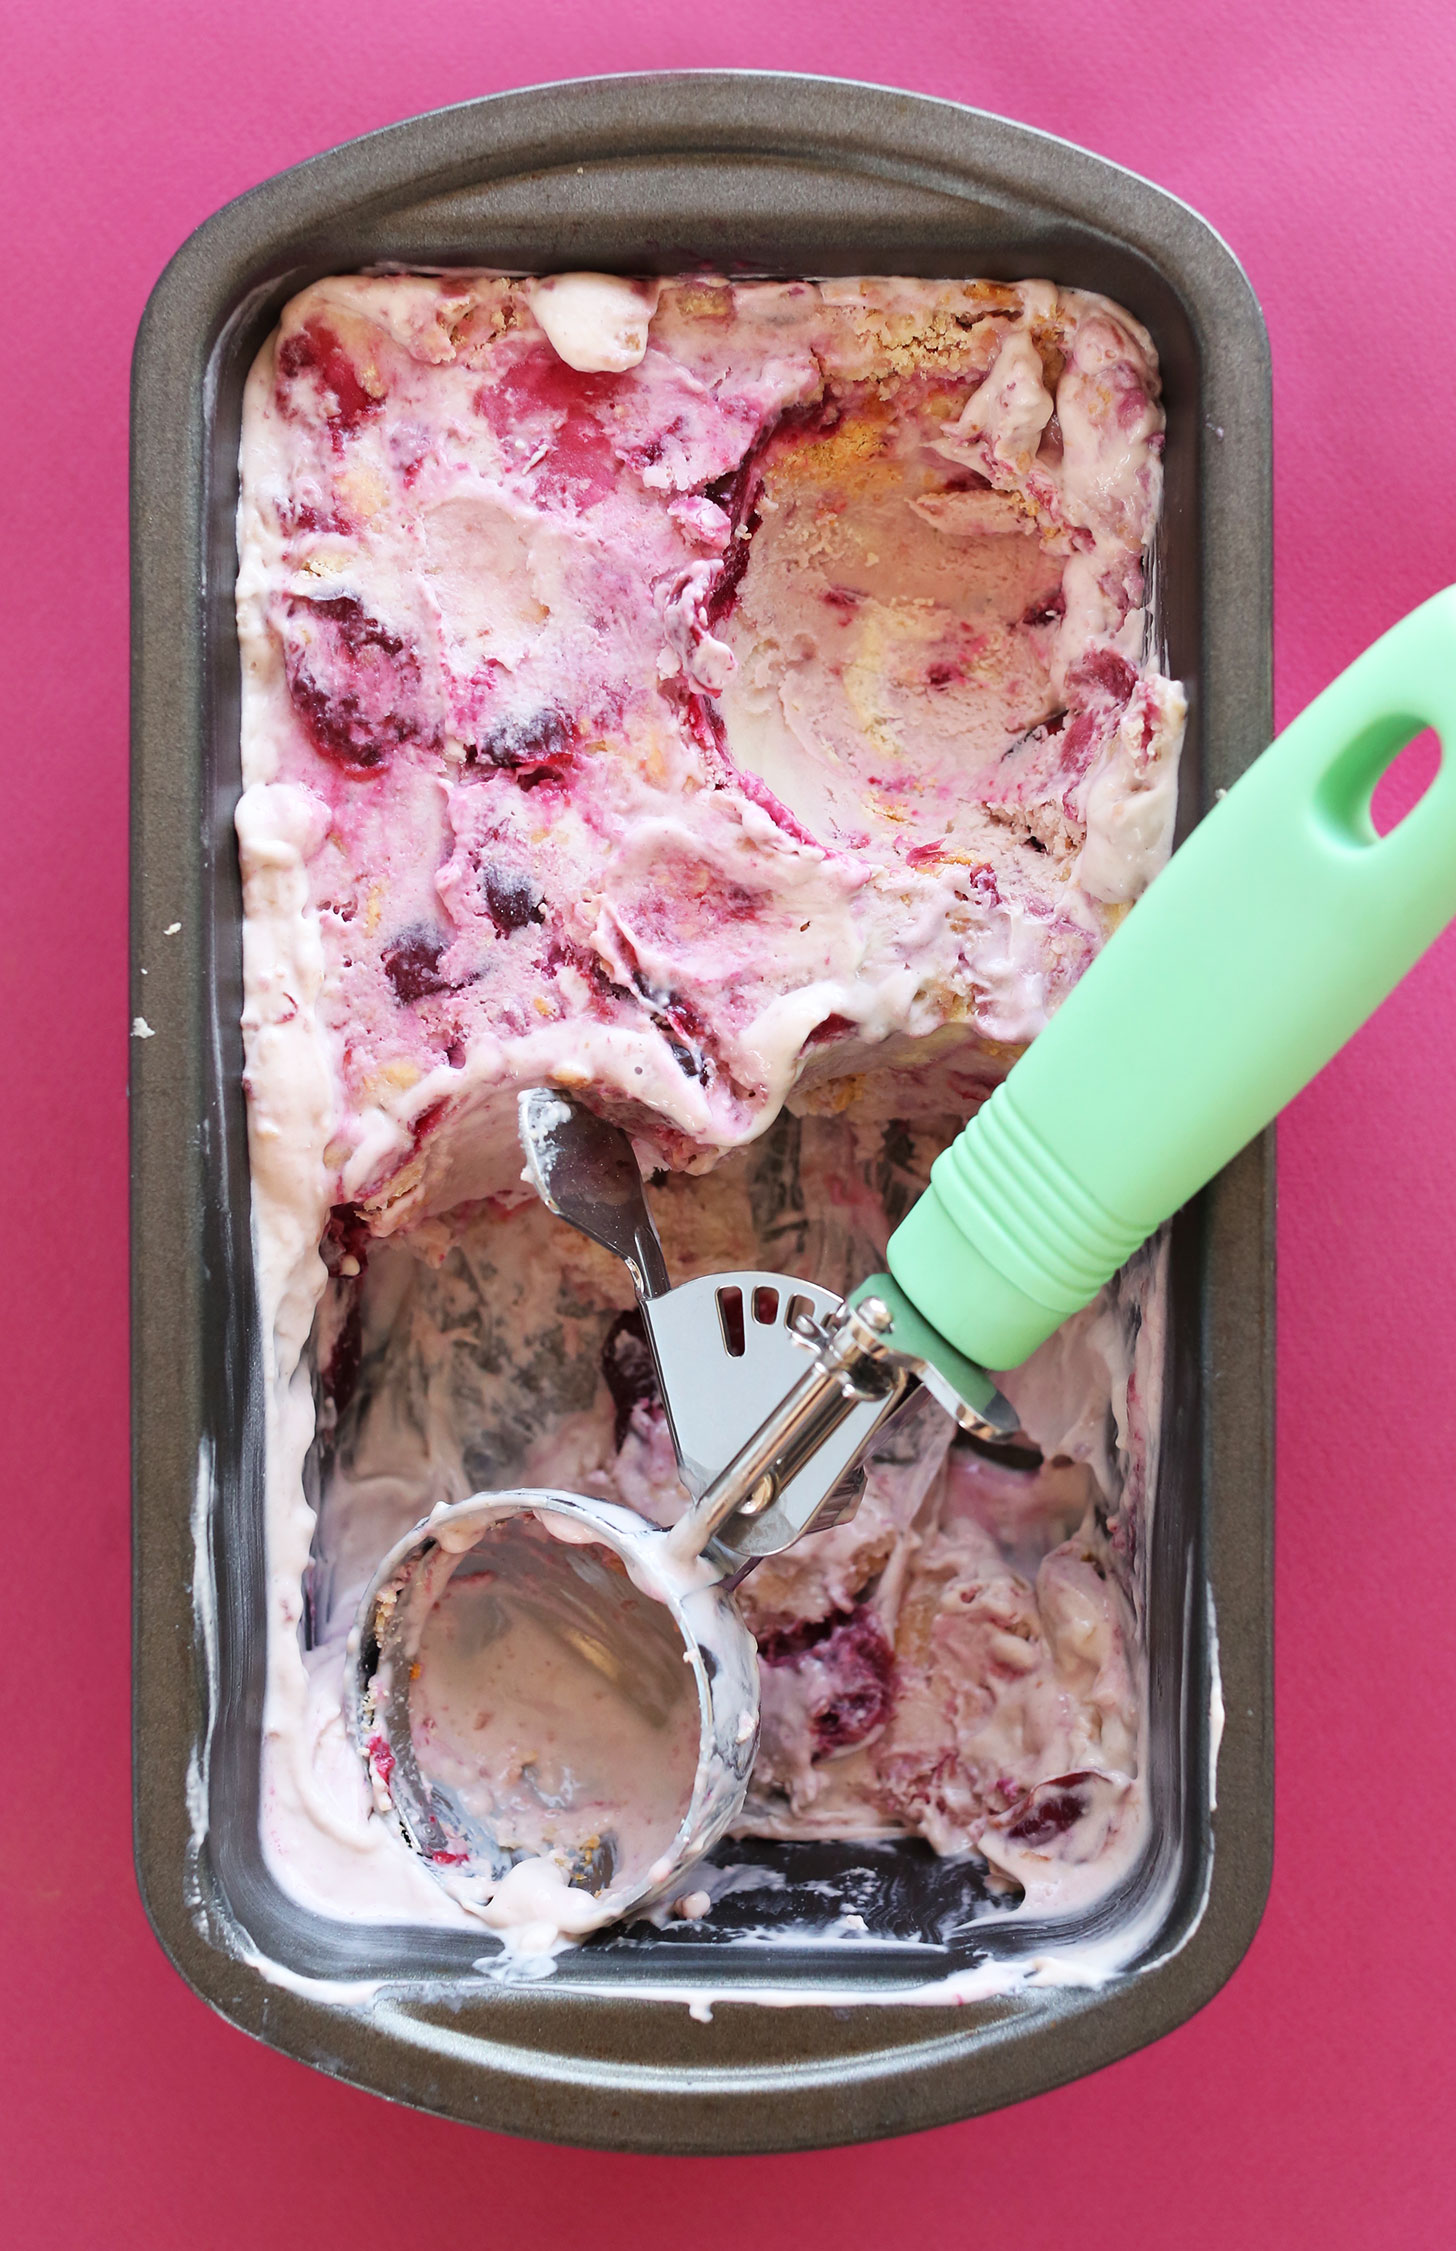 Grabbing a scoop of Cherry Pie Ice Cream for a 4th of July Vegan Dessert